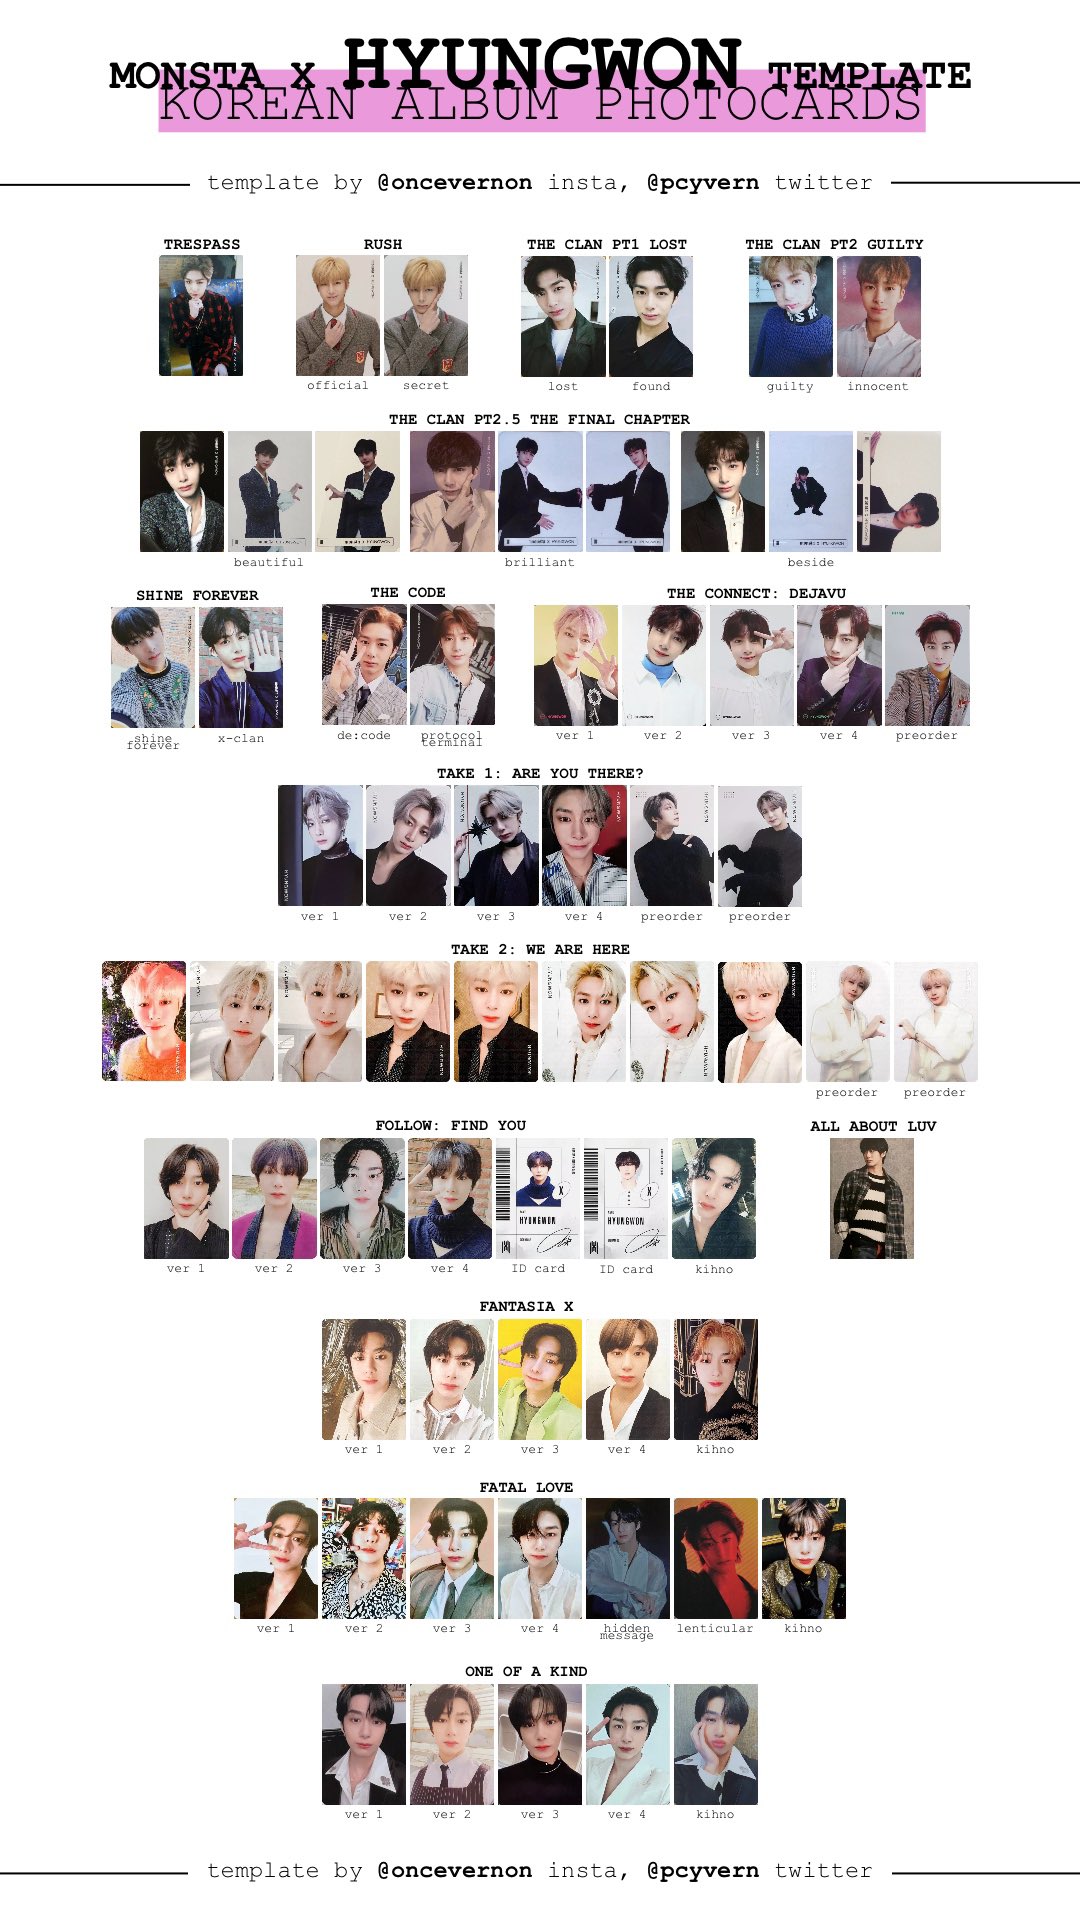 bella on X: up to date monsta x korean album photocard templates with the  shape of love photocards added! all members are available on the google  drive  in the MONSTA X